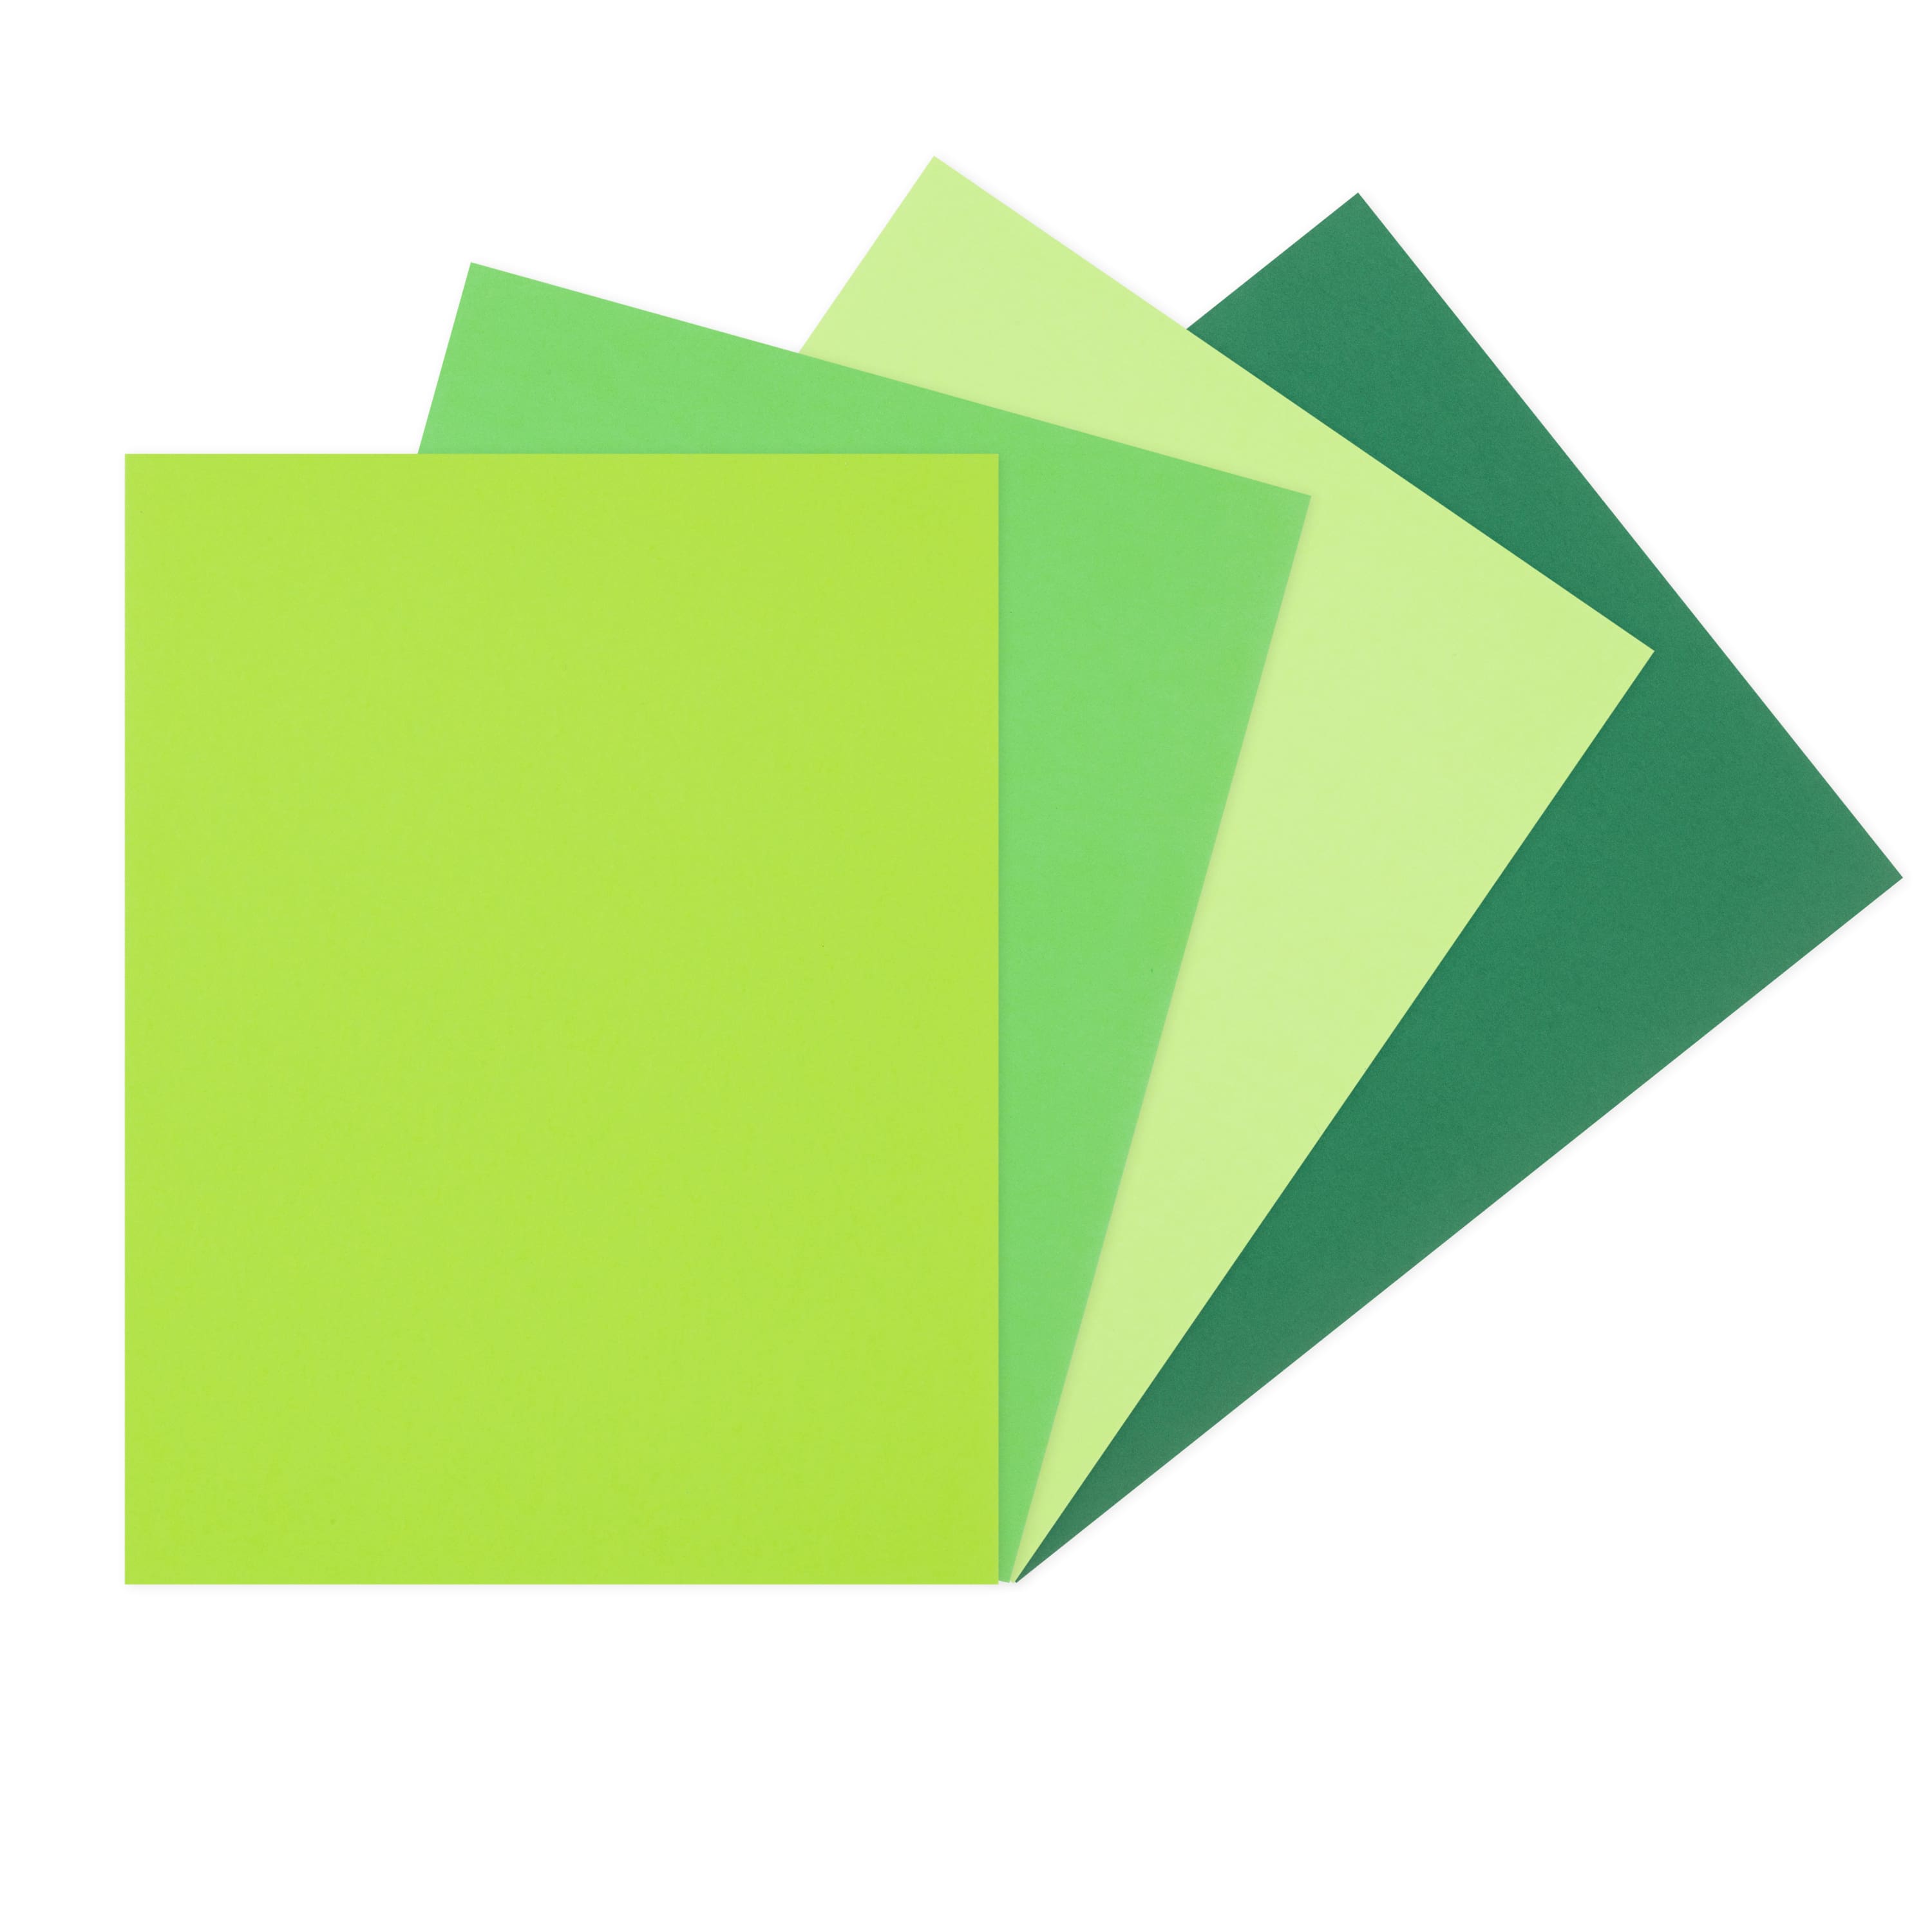 Garden Greens 8.5 x 11 Cardstock Paper by Recollections™, 100 Sheets